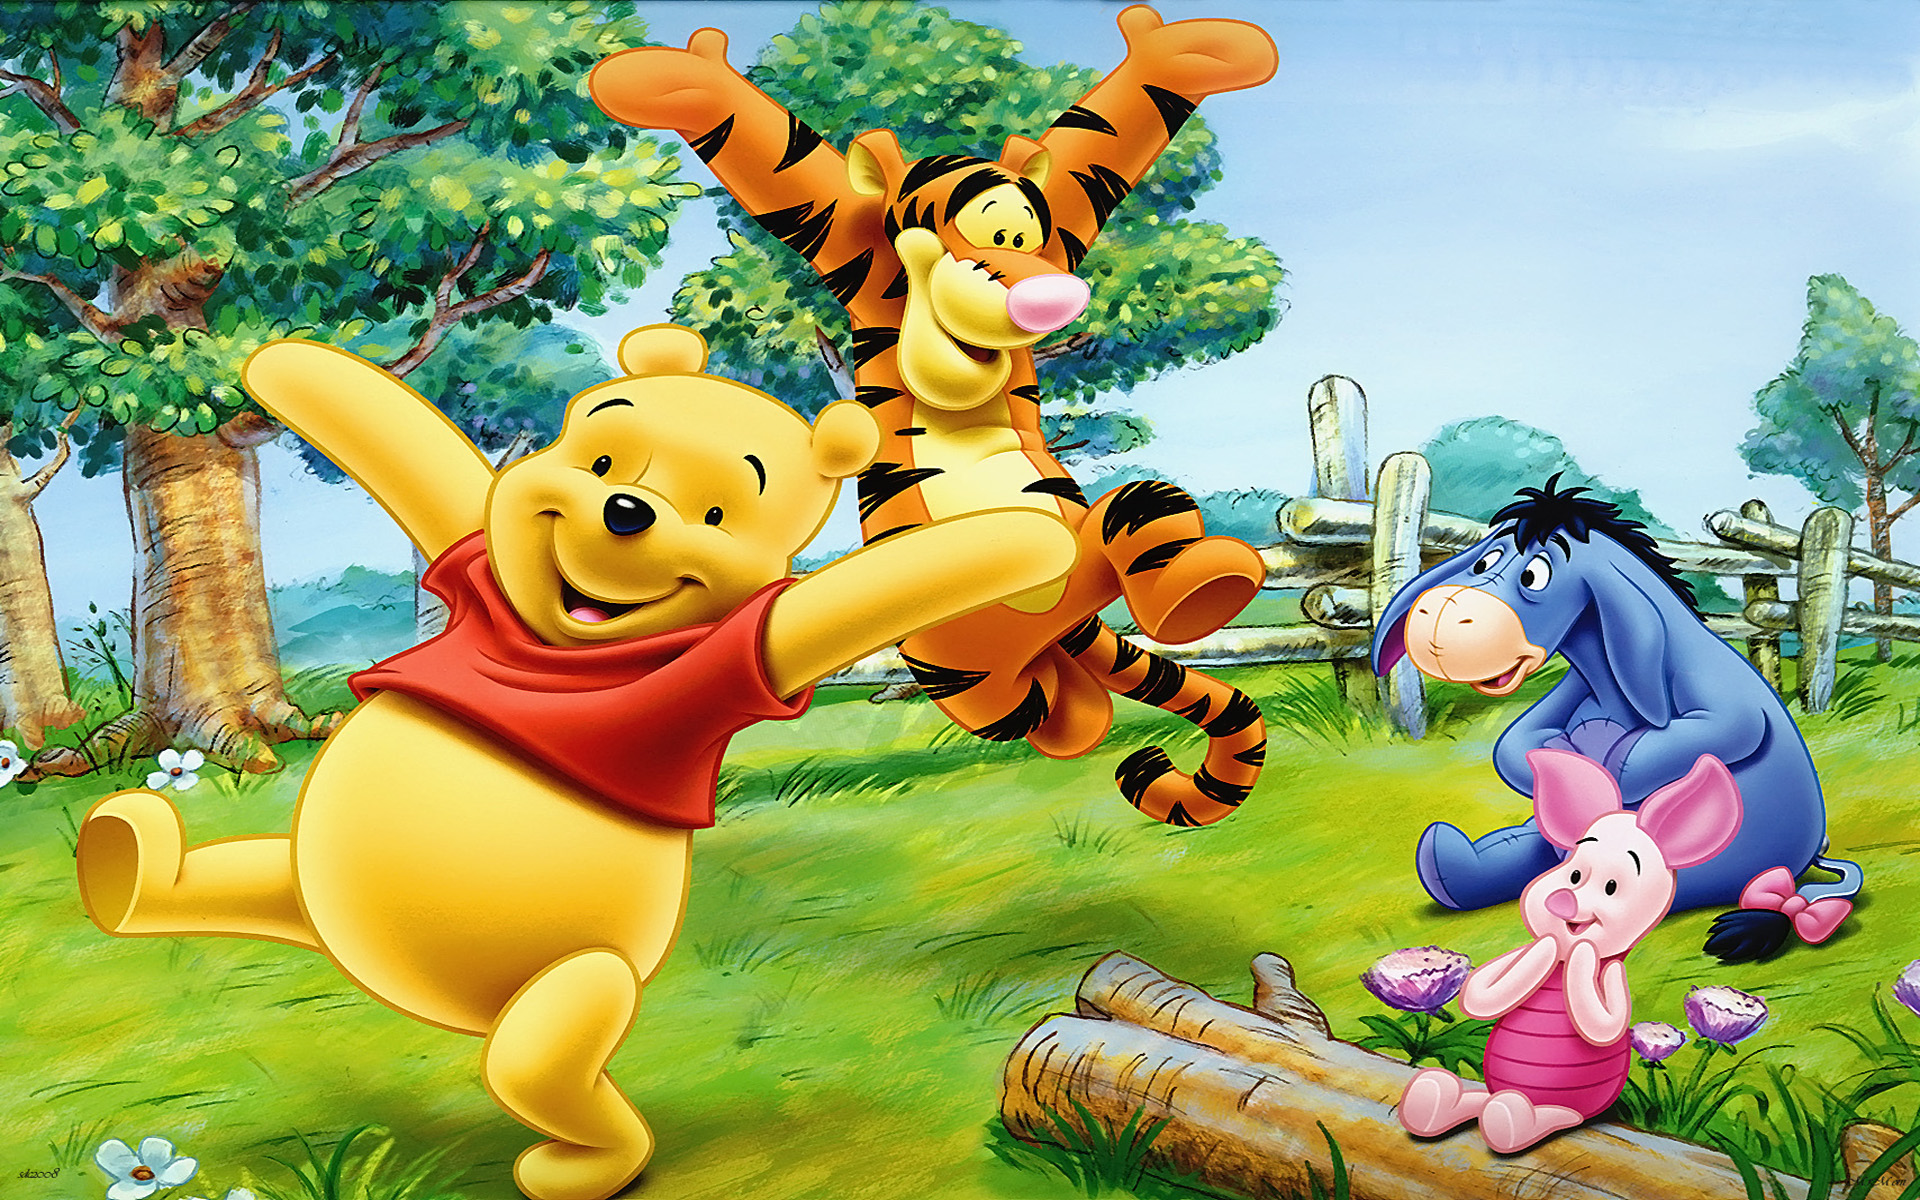 Cartoon Tigger Piglet And Winnie The Pooh Happy And Cheerful Friends